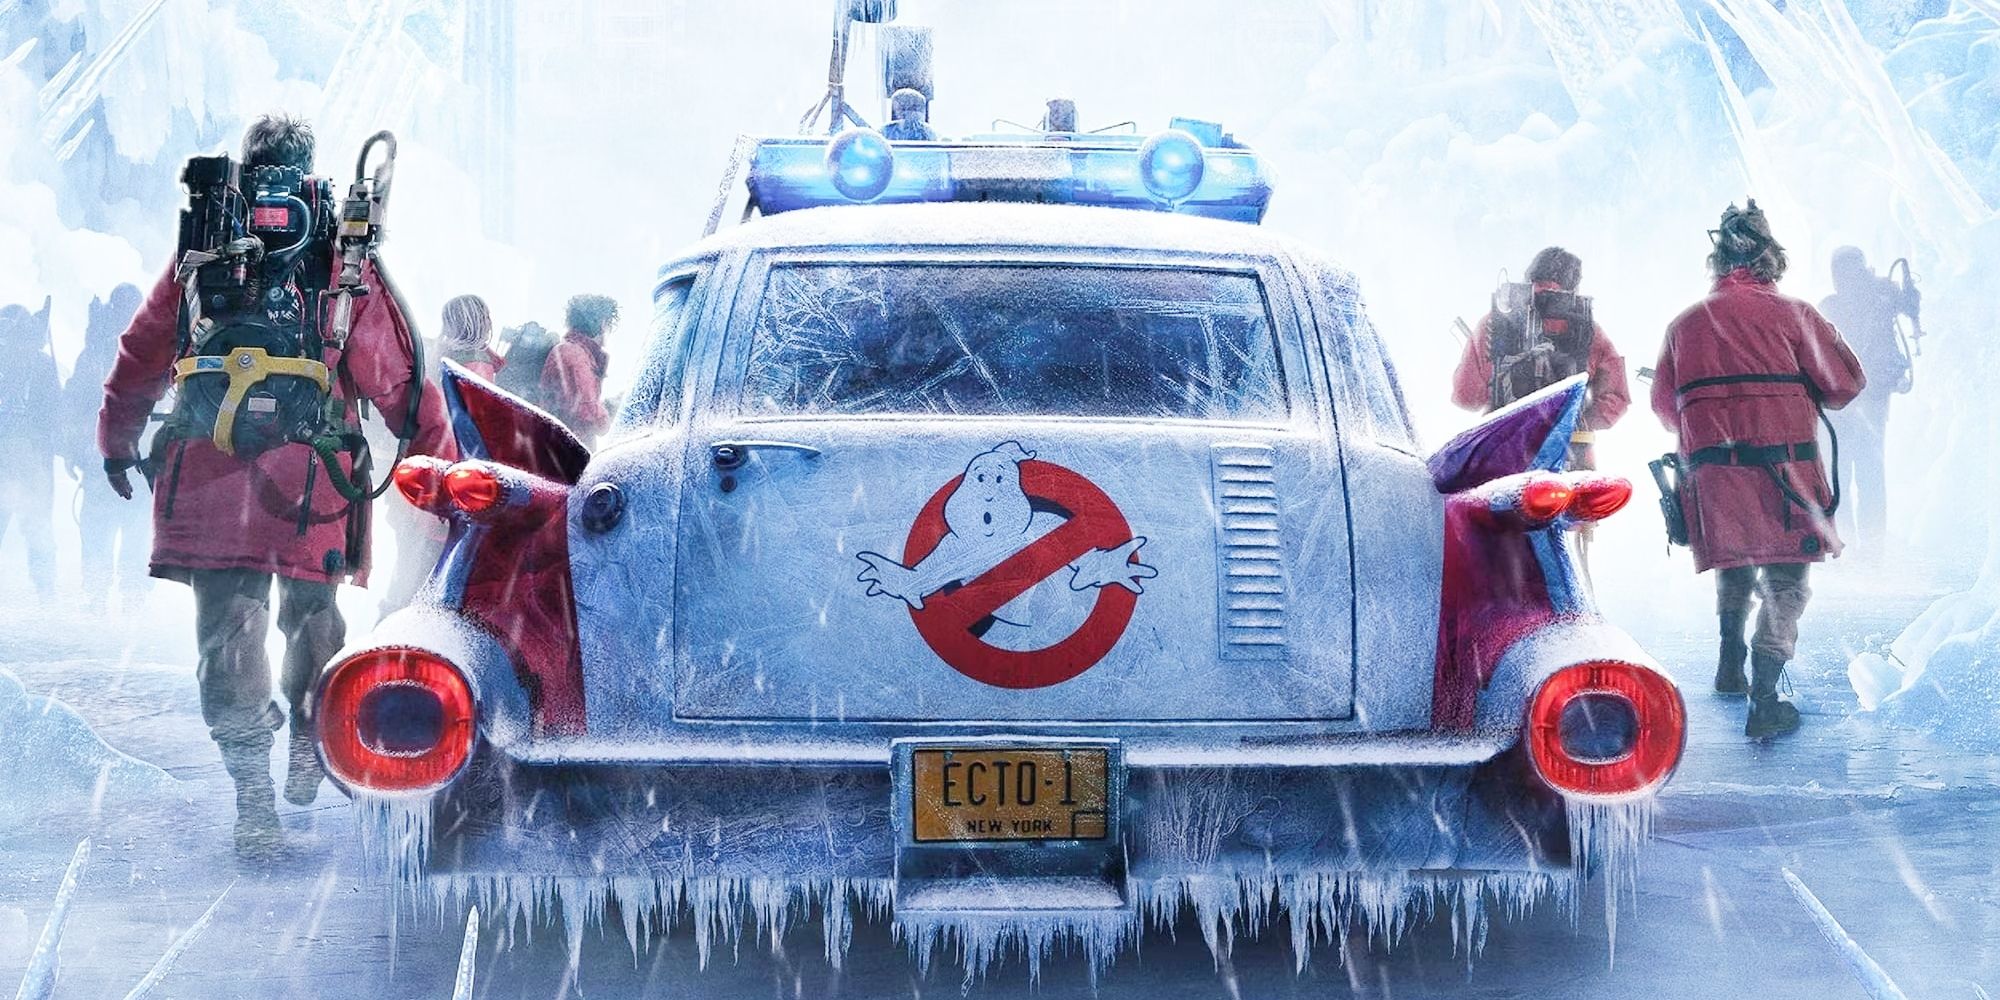 Ghostbusters Director Says Late 80s Animated Series Inspired Frozen Empire